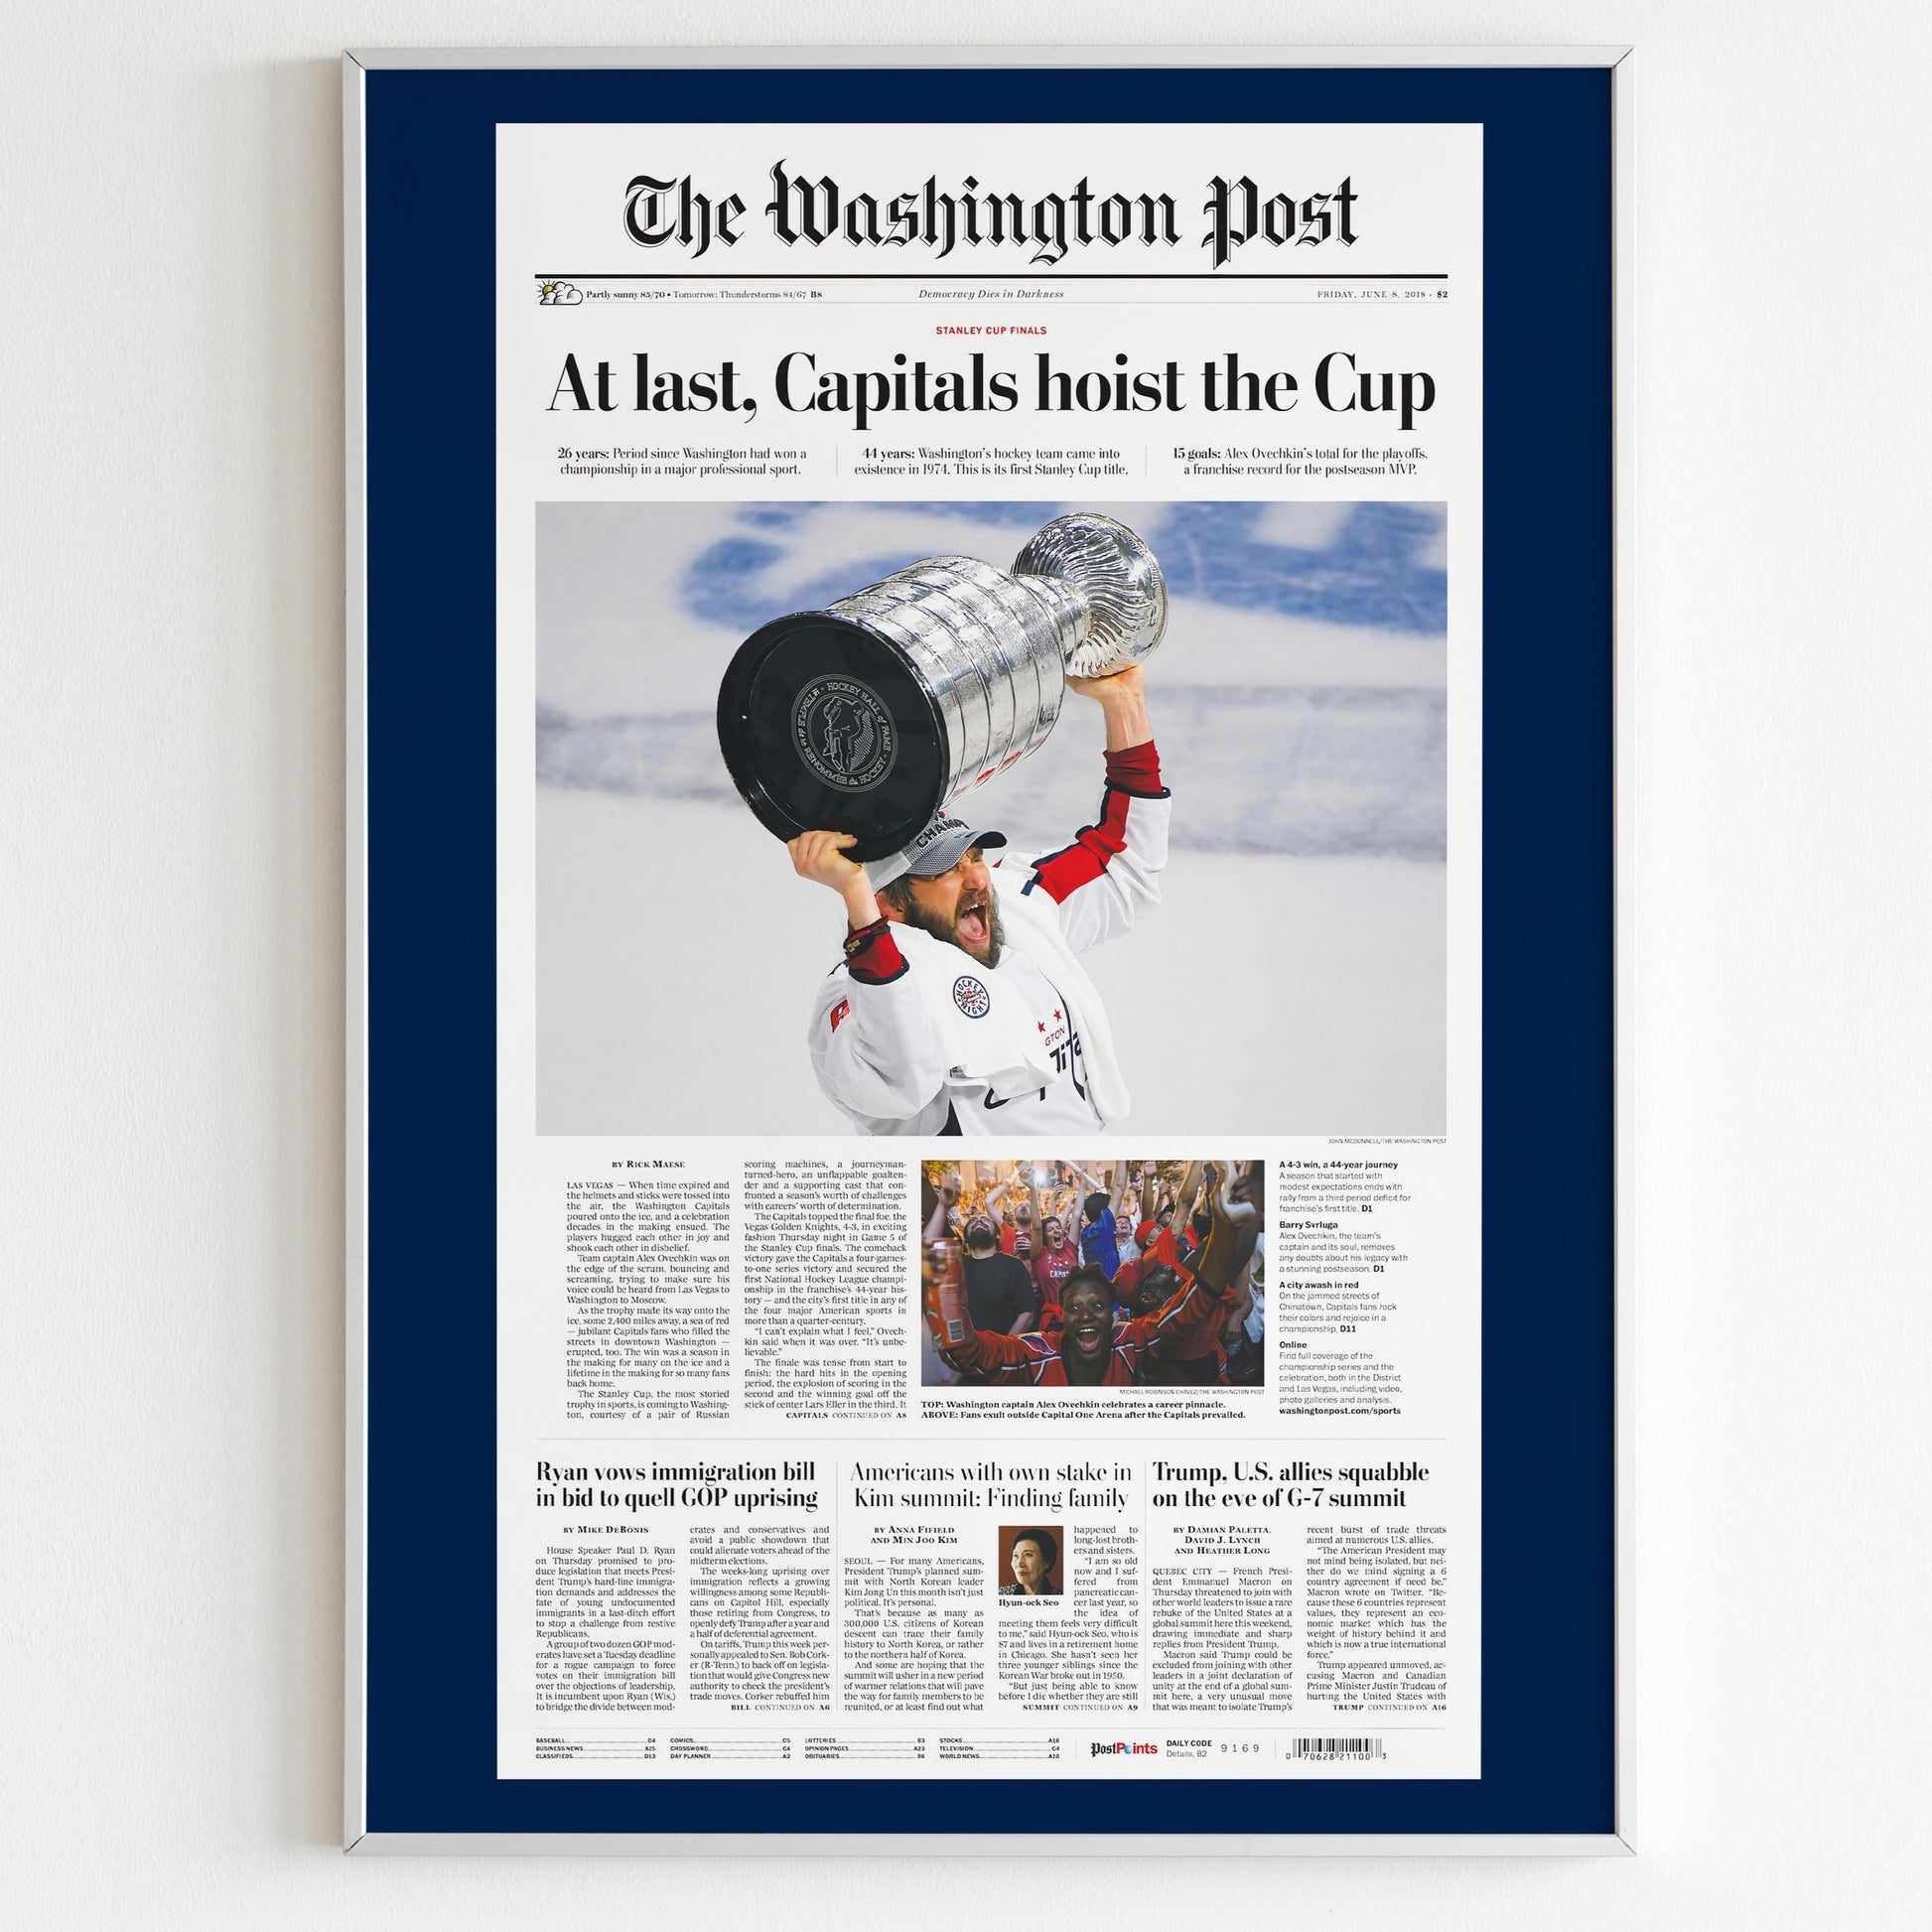 Washington Capitals 2018 NHL Stanley Cup Champions Front Cover The Washington Post Poster, Newspaper Front Page, Hockey Team Magazine